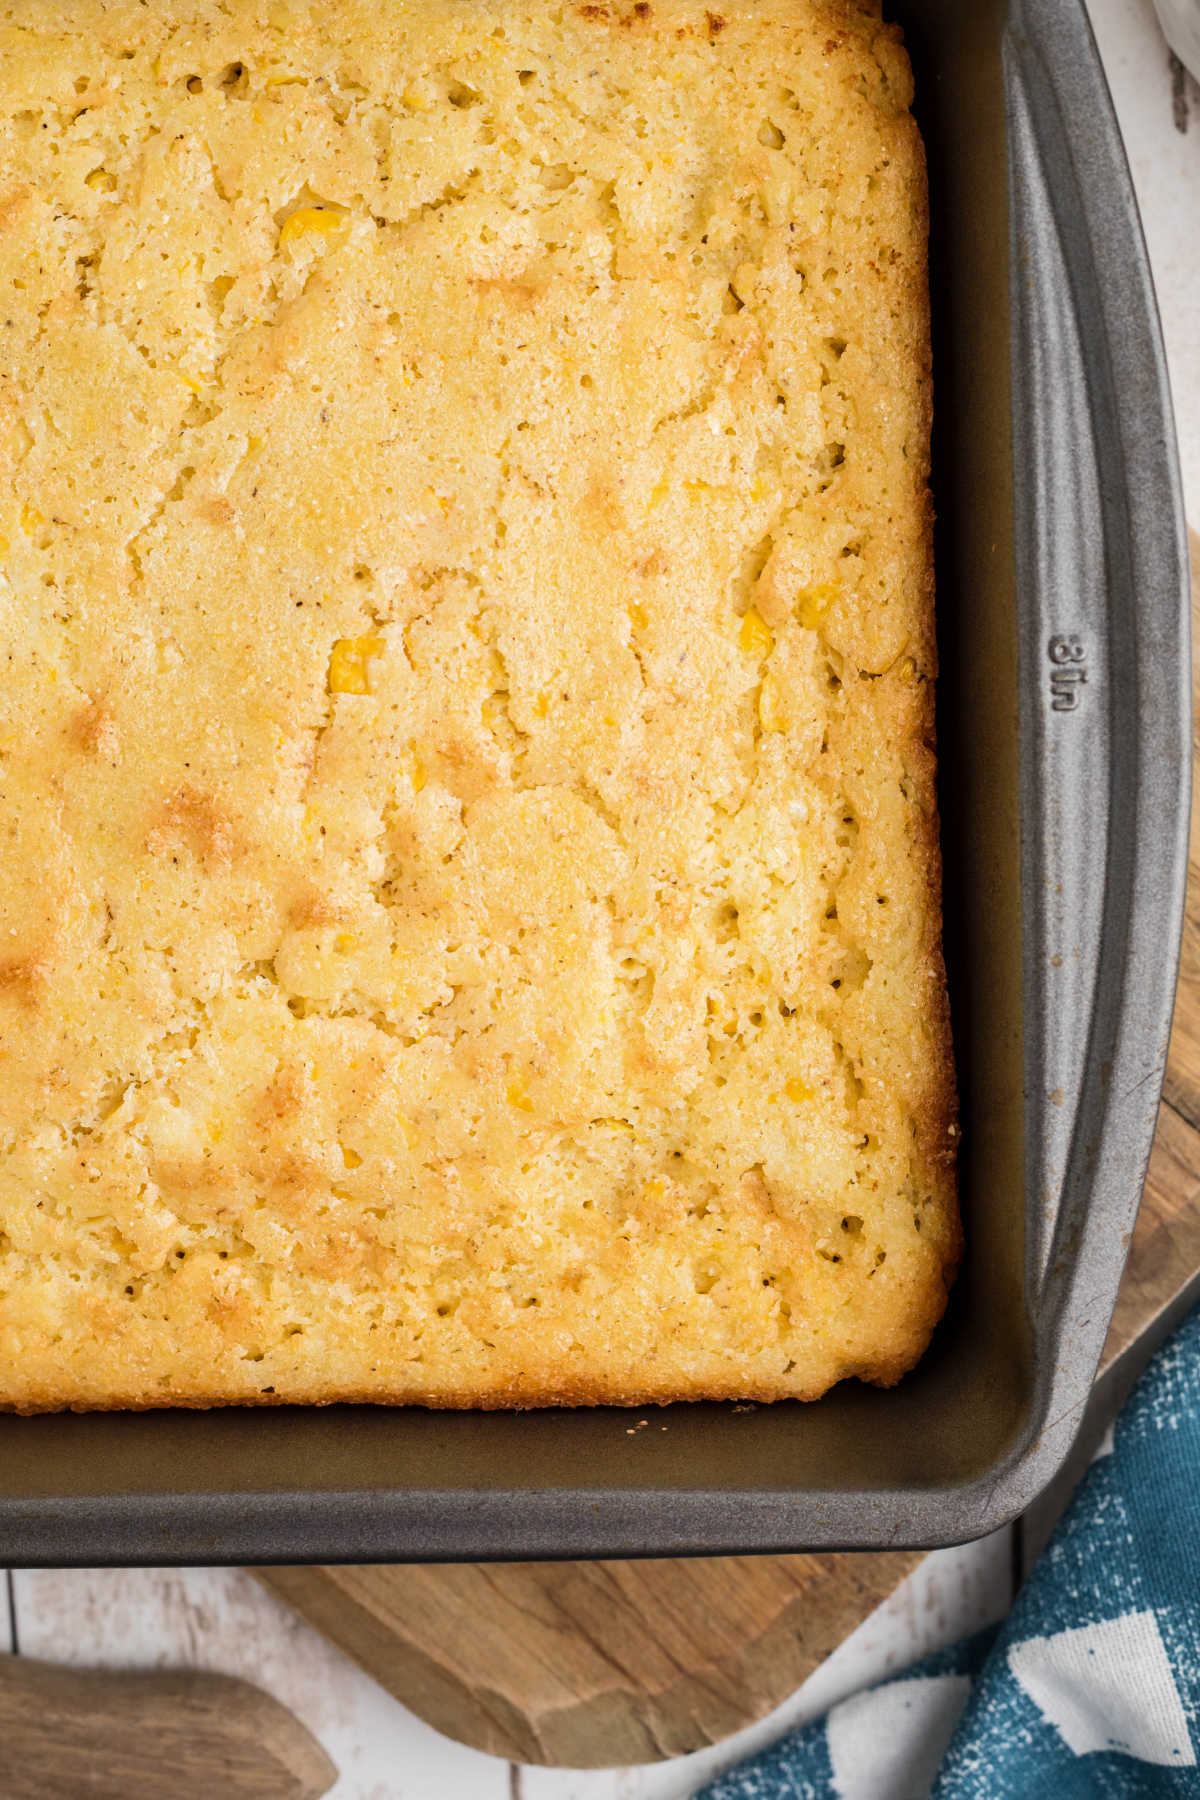 OVerhead shot of the corner of a cornbread in a pan.